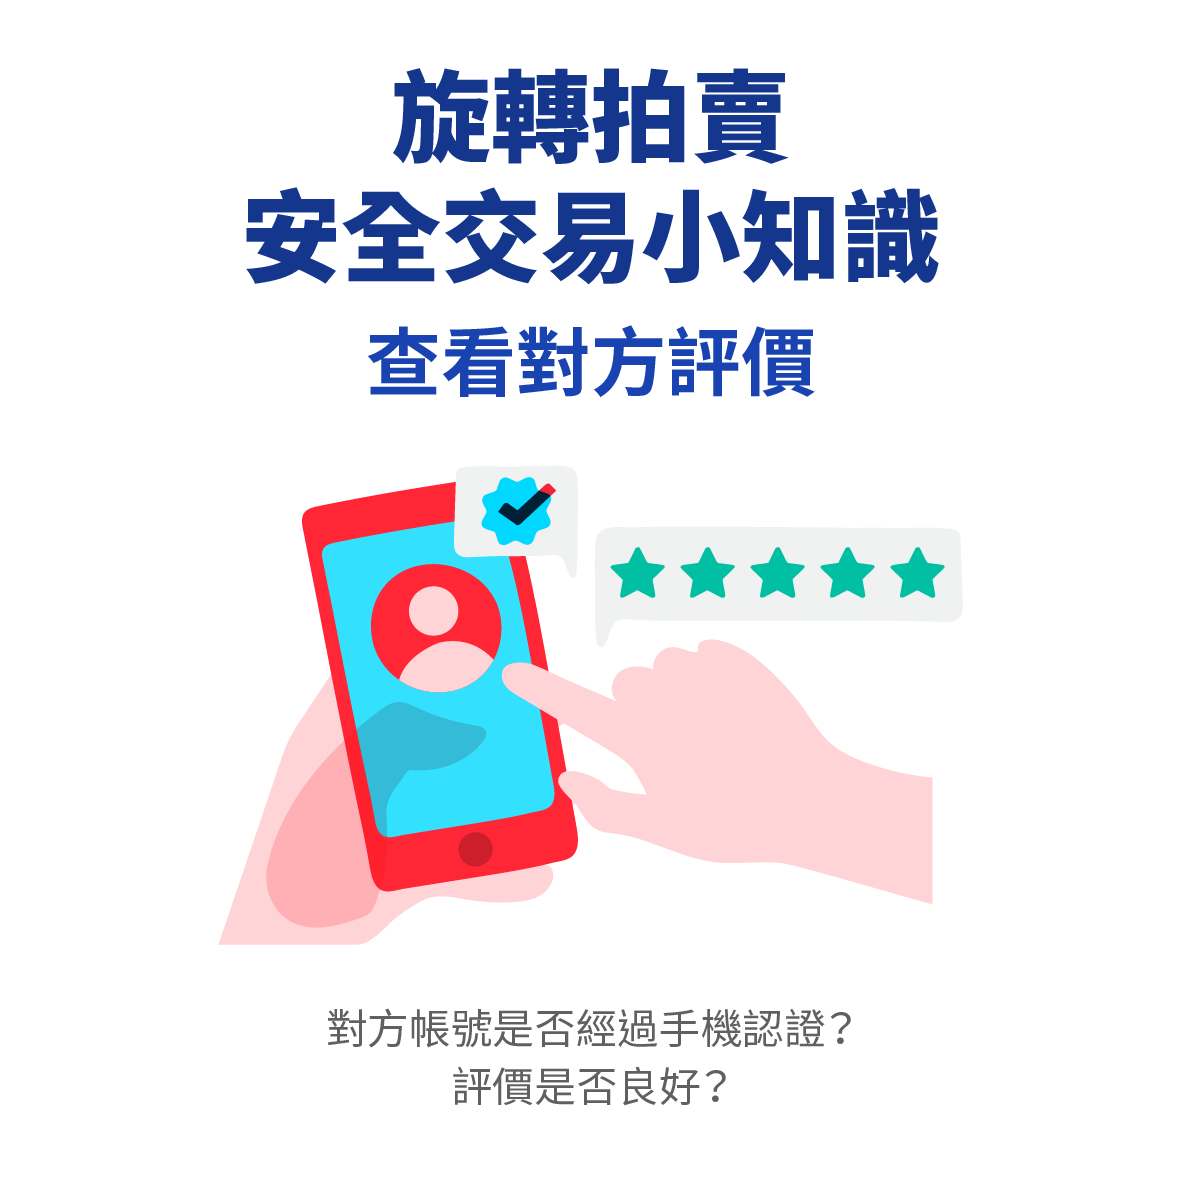 HelpCentre_How-to-deal-safely-on-Carousell_TW-1.png